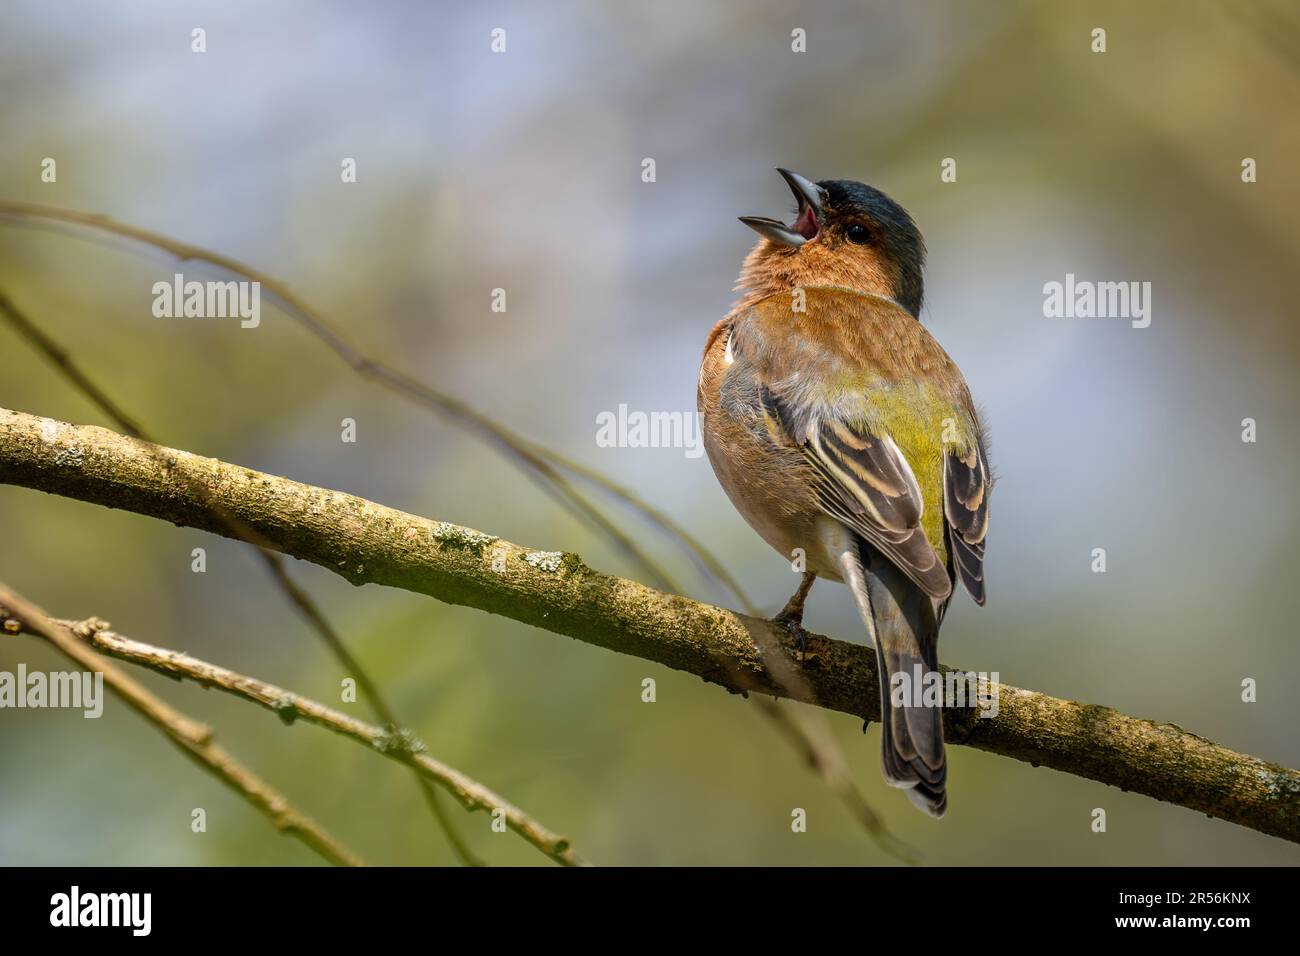 Common Chaffinch - Fringilla coelebs, beautiful colored perching bird from Old World forests, Zlin, Czech Republic. Stock Photo